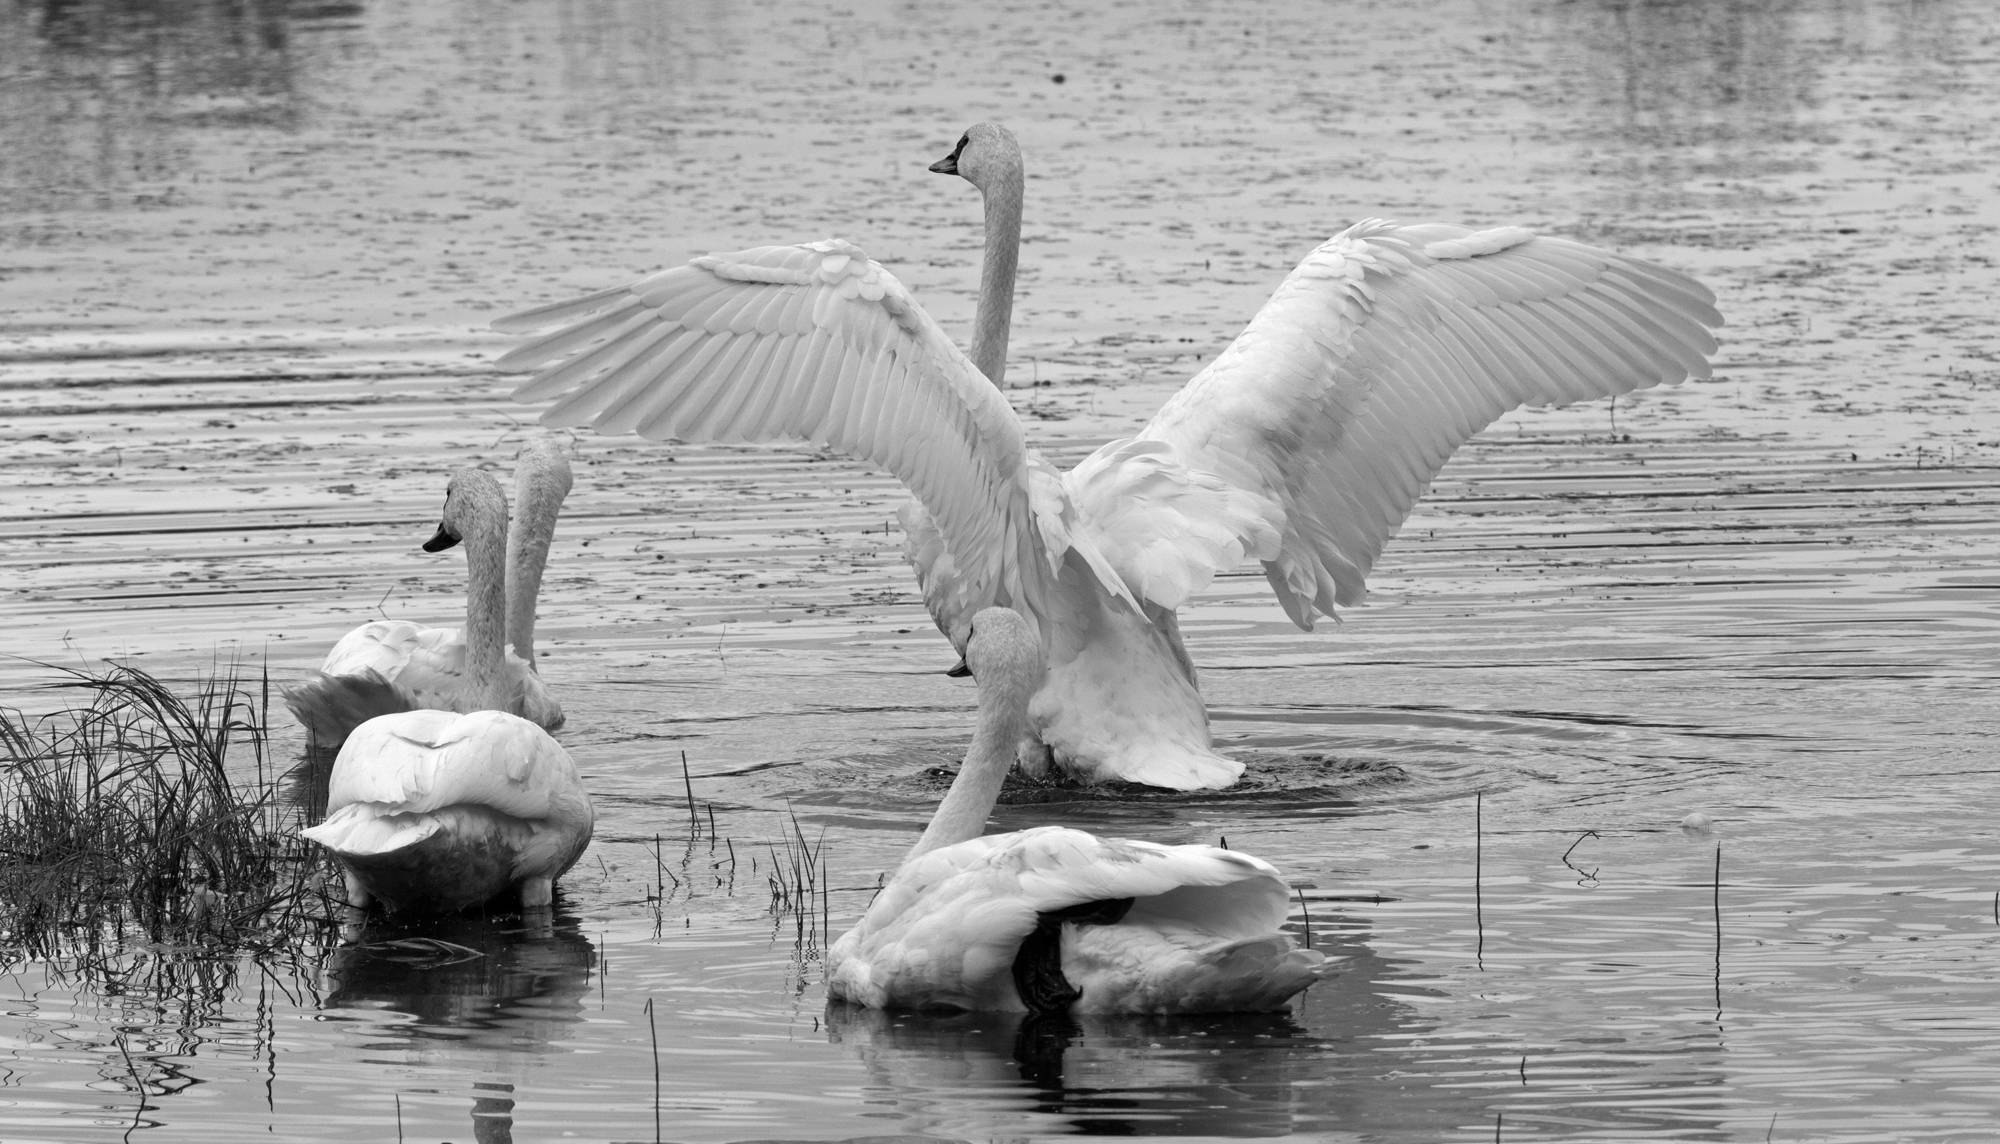 Trumpeter swans rest on a pond in the Dredge Lake area. (Photo by Jos Bakker)